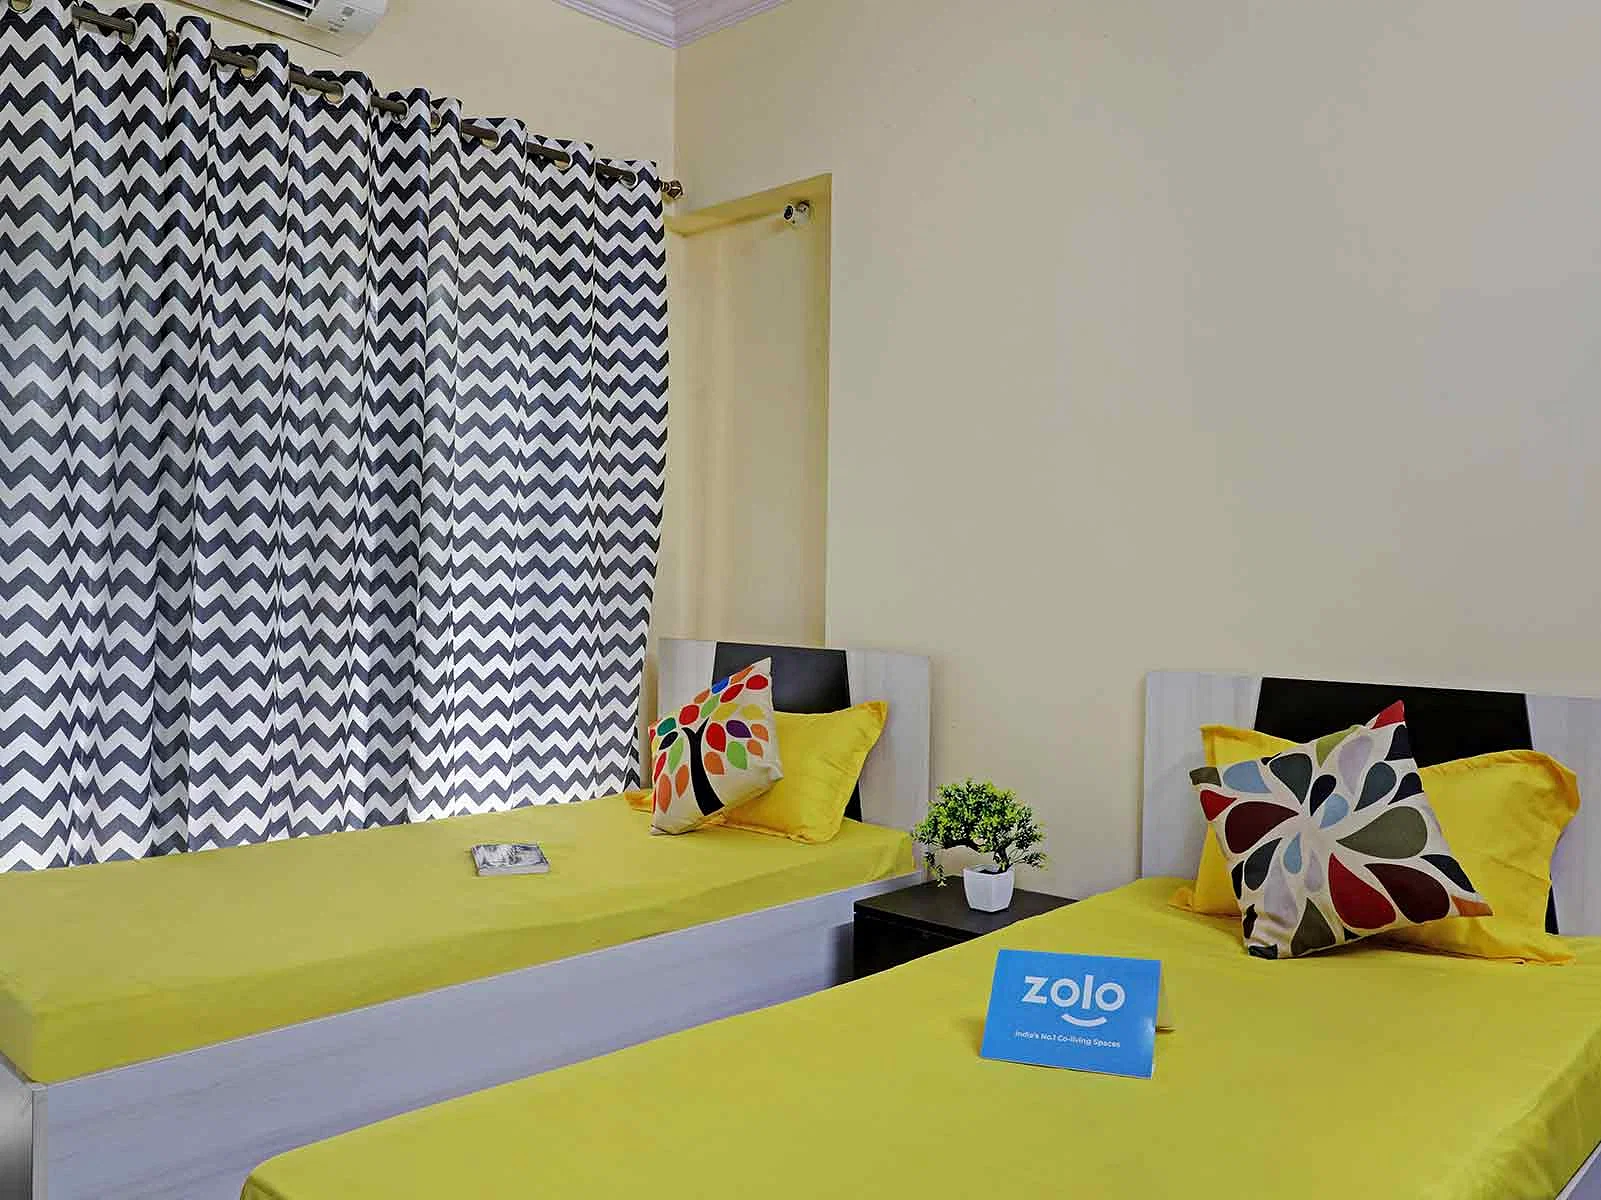 safe and affordable hostels for boys students with 24/7 security and CCTV surveillance-Zolo Kanishka